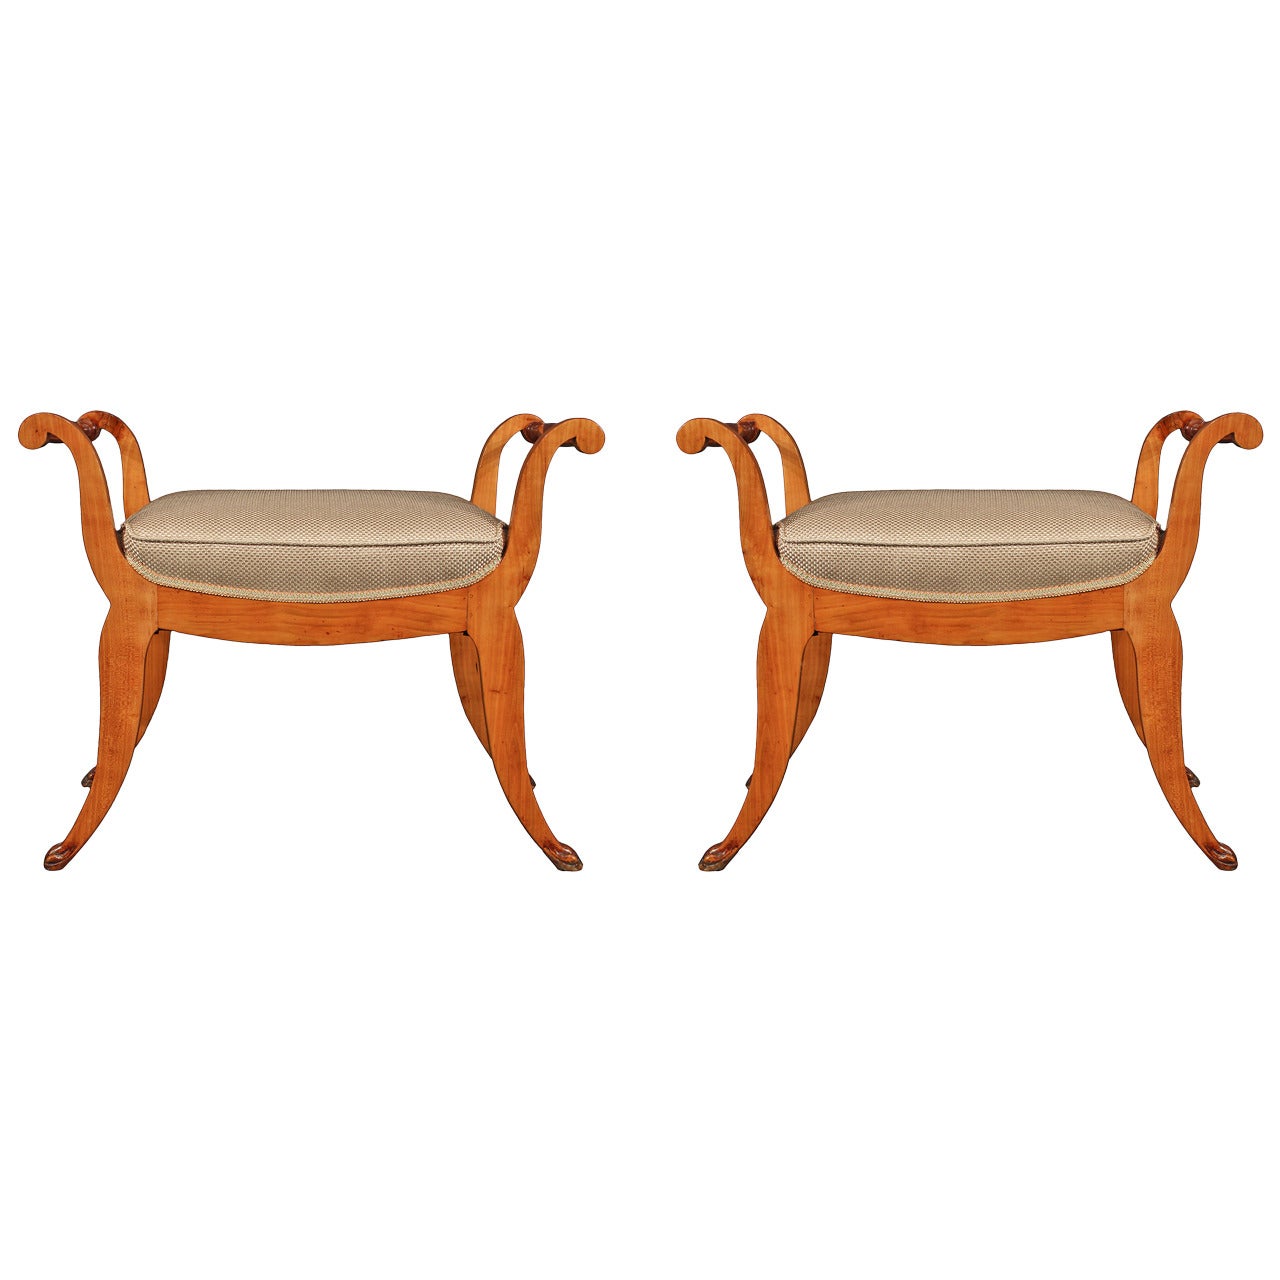 Pair of French Early 19th Century Directoire Style Cherry Wood Benches